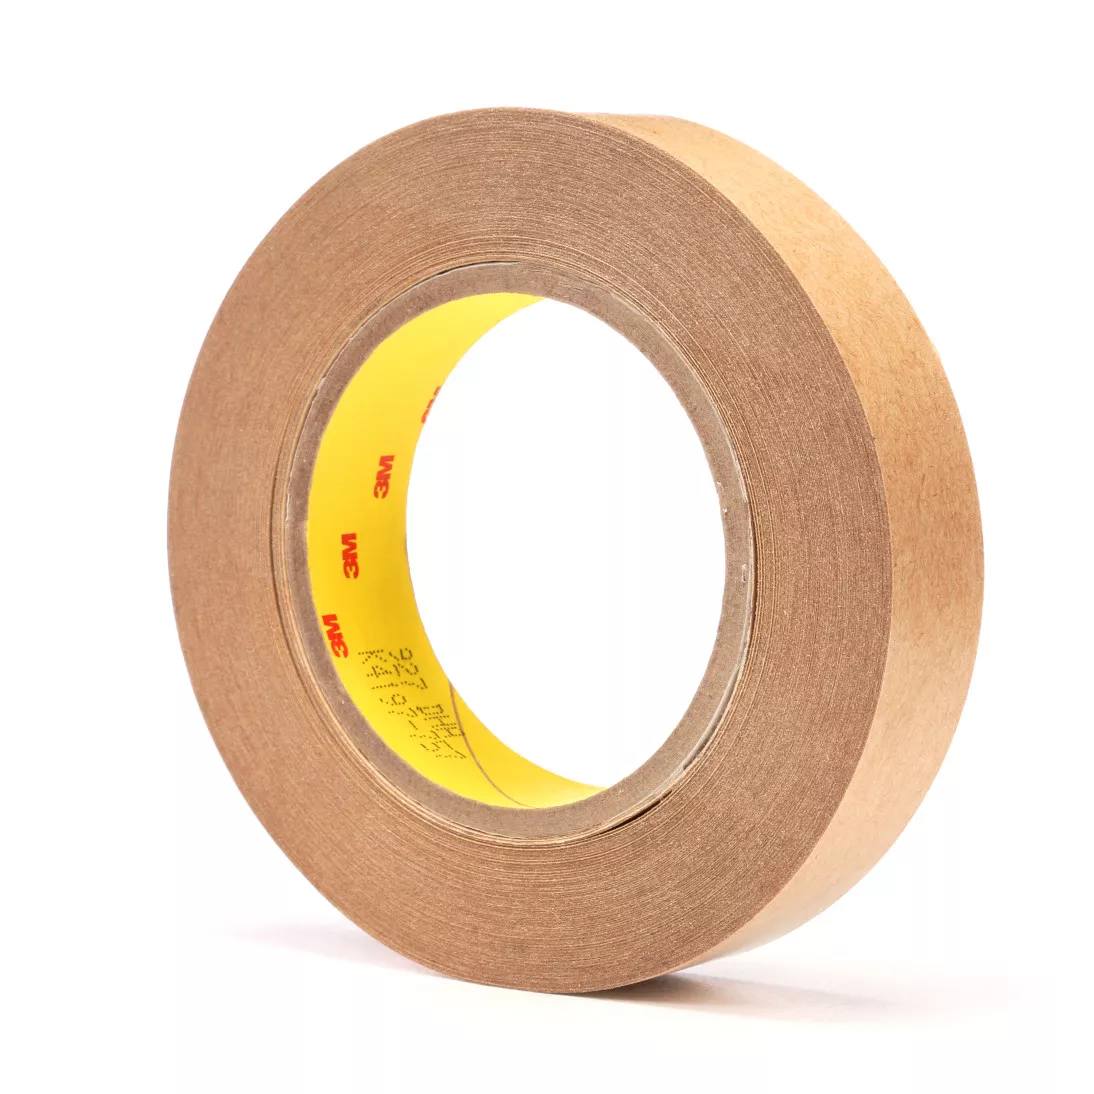 3M™ Adhesive Transfer Tape 927, Clear, 1 in x 60 yd, 2 mil, 36 rolls per
case